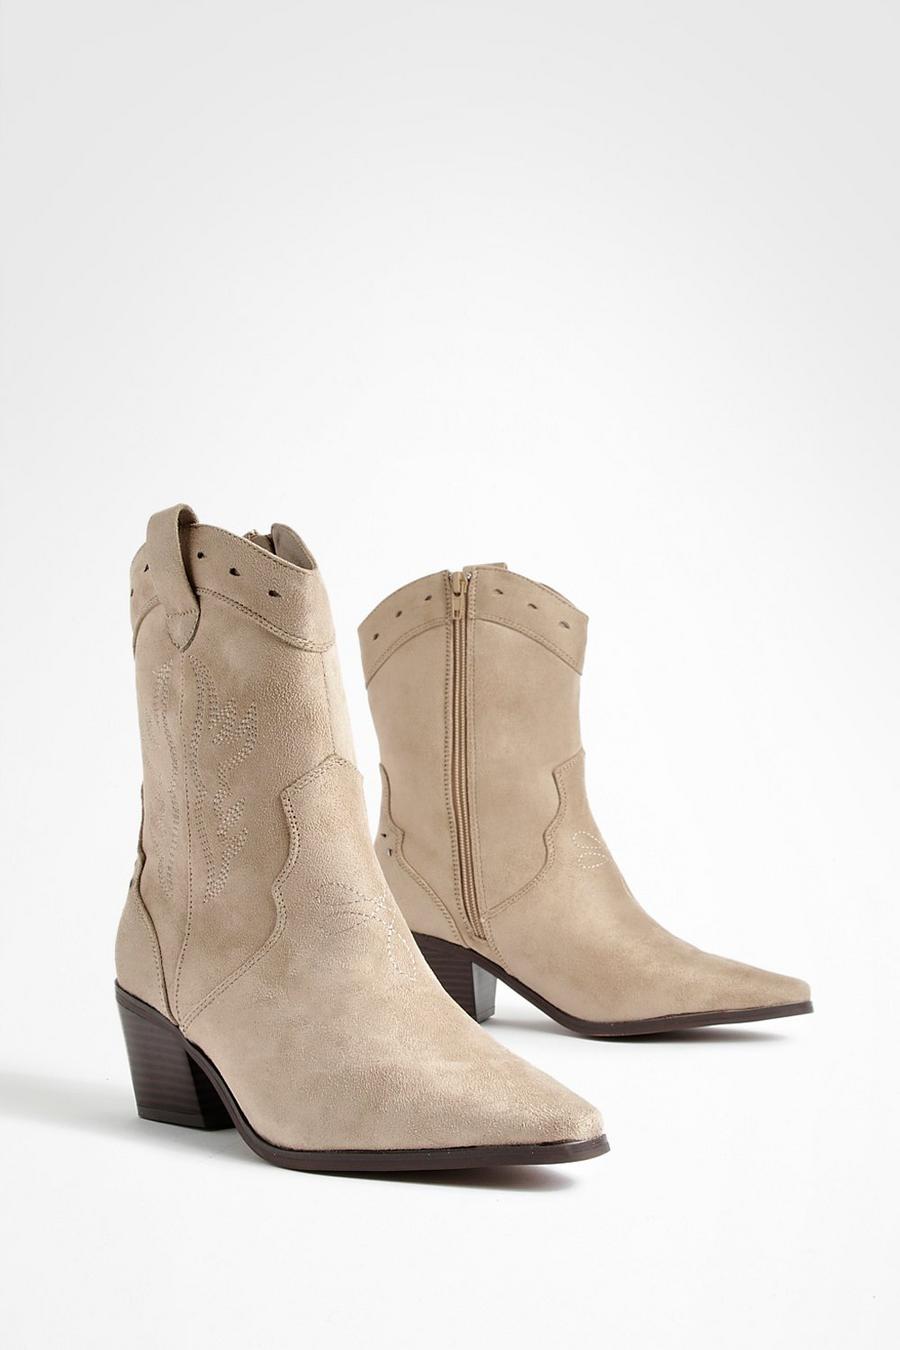 Taupe Cut Out Detail Western Cowboy Boots